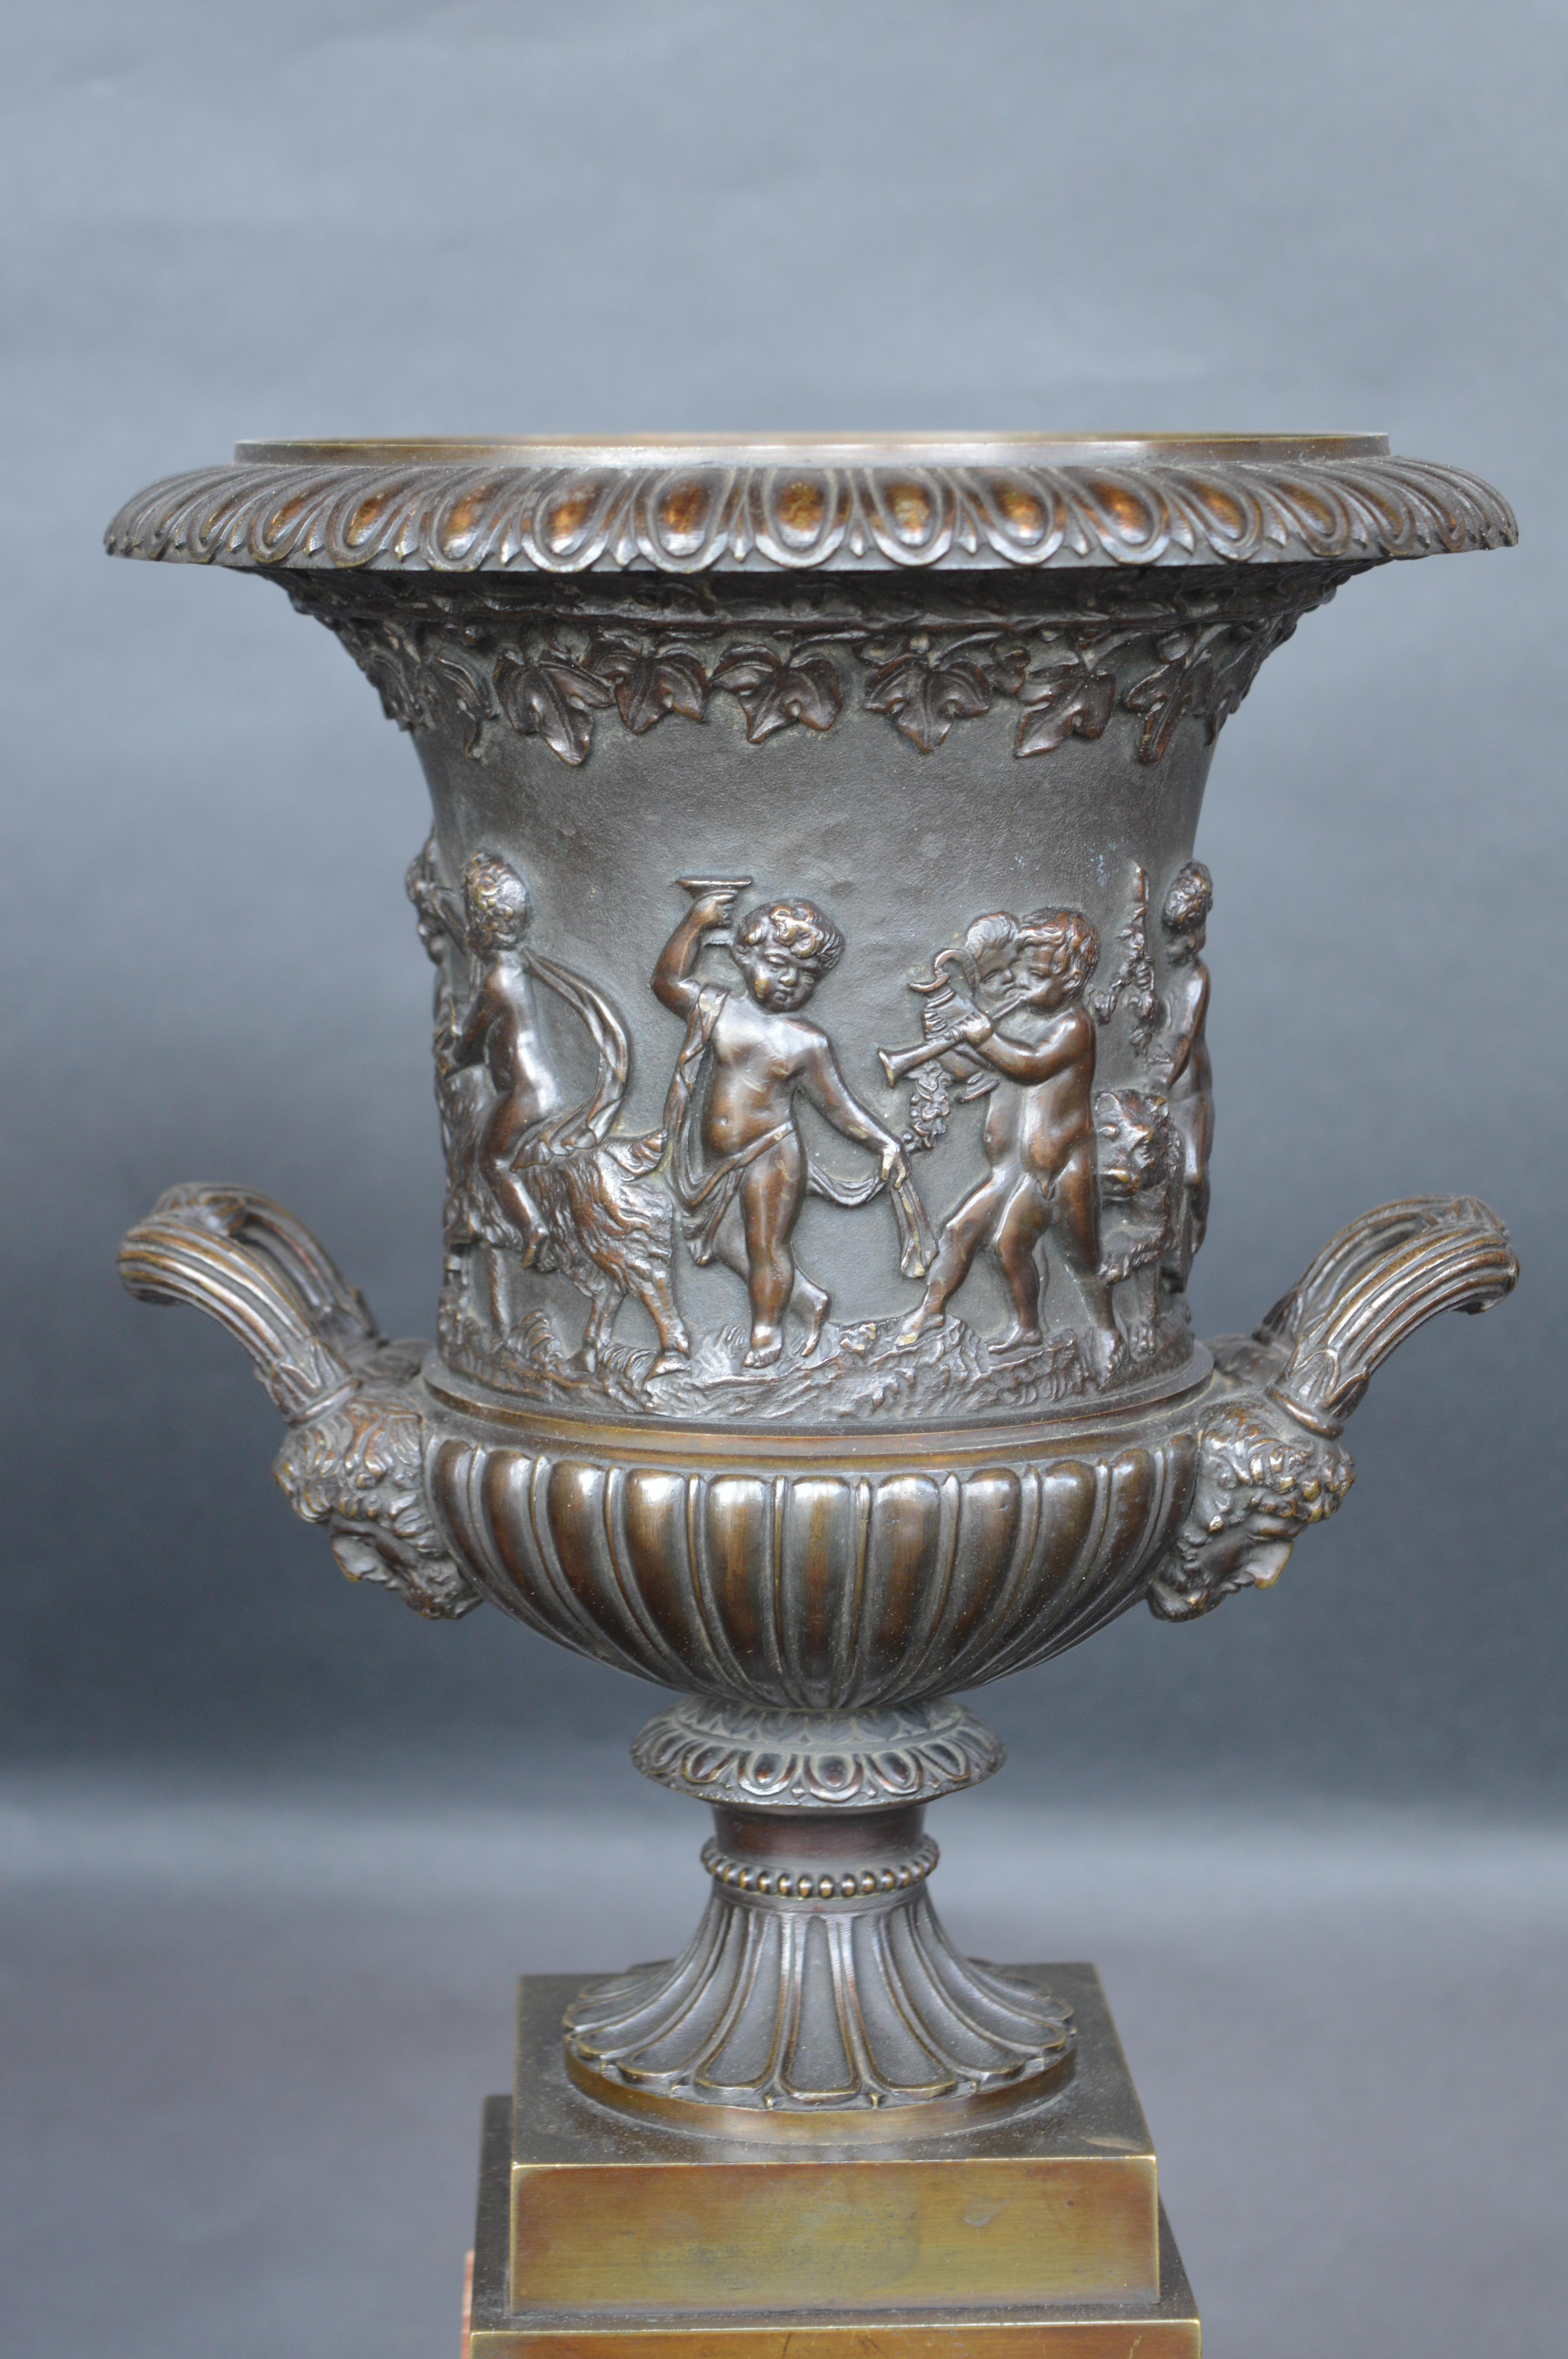 Bronze patinated vases sit on top of a sienna marble base. Cherubs surround the vase, feeding grapes to a woman in a chariot.